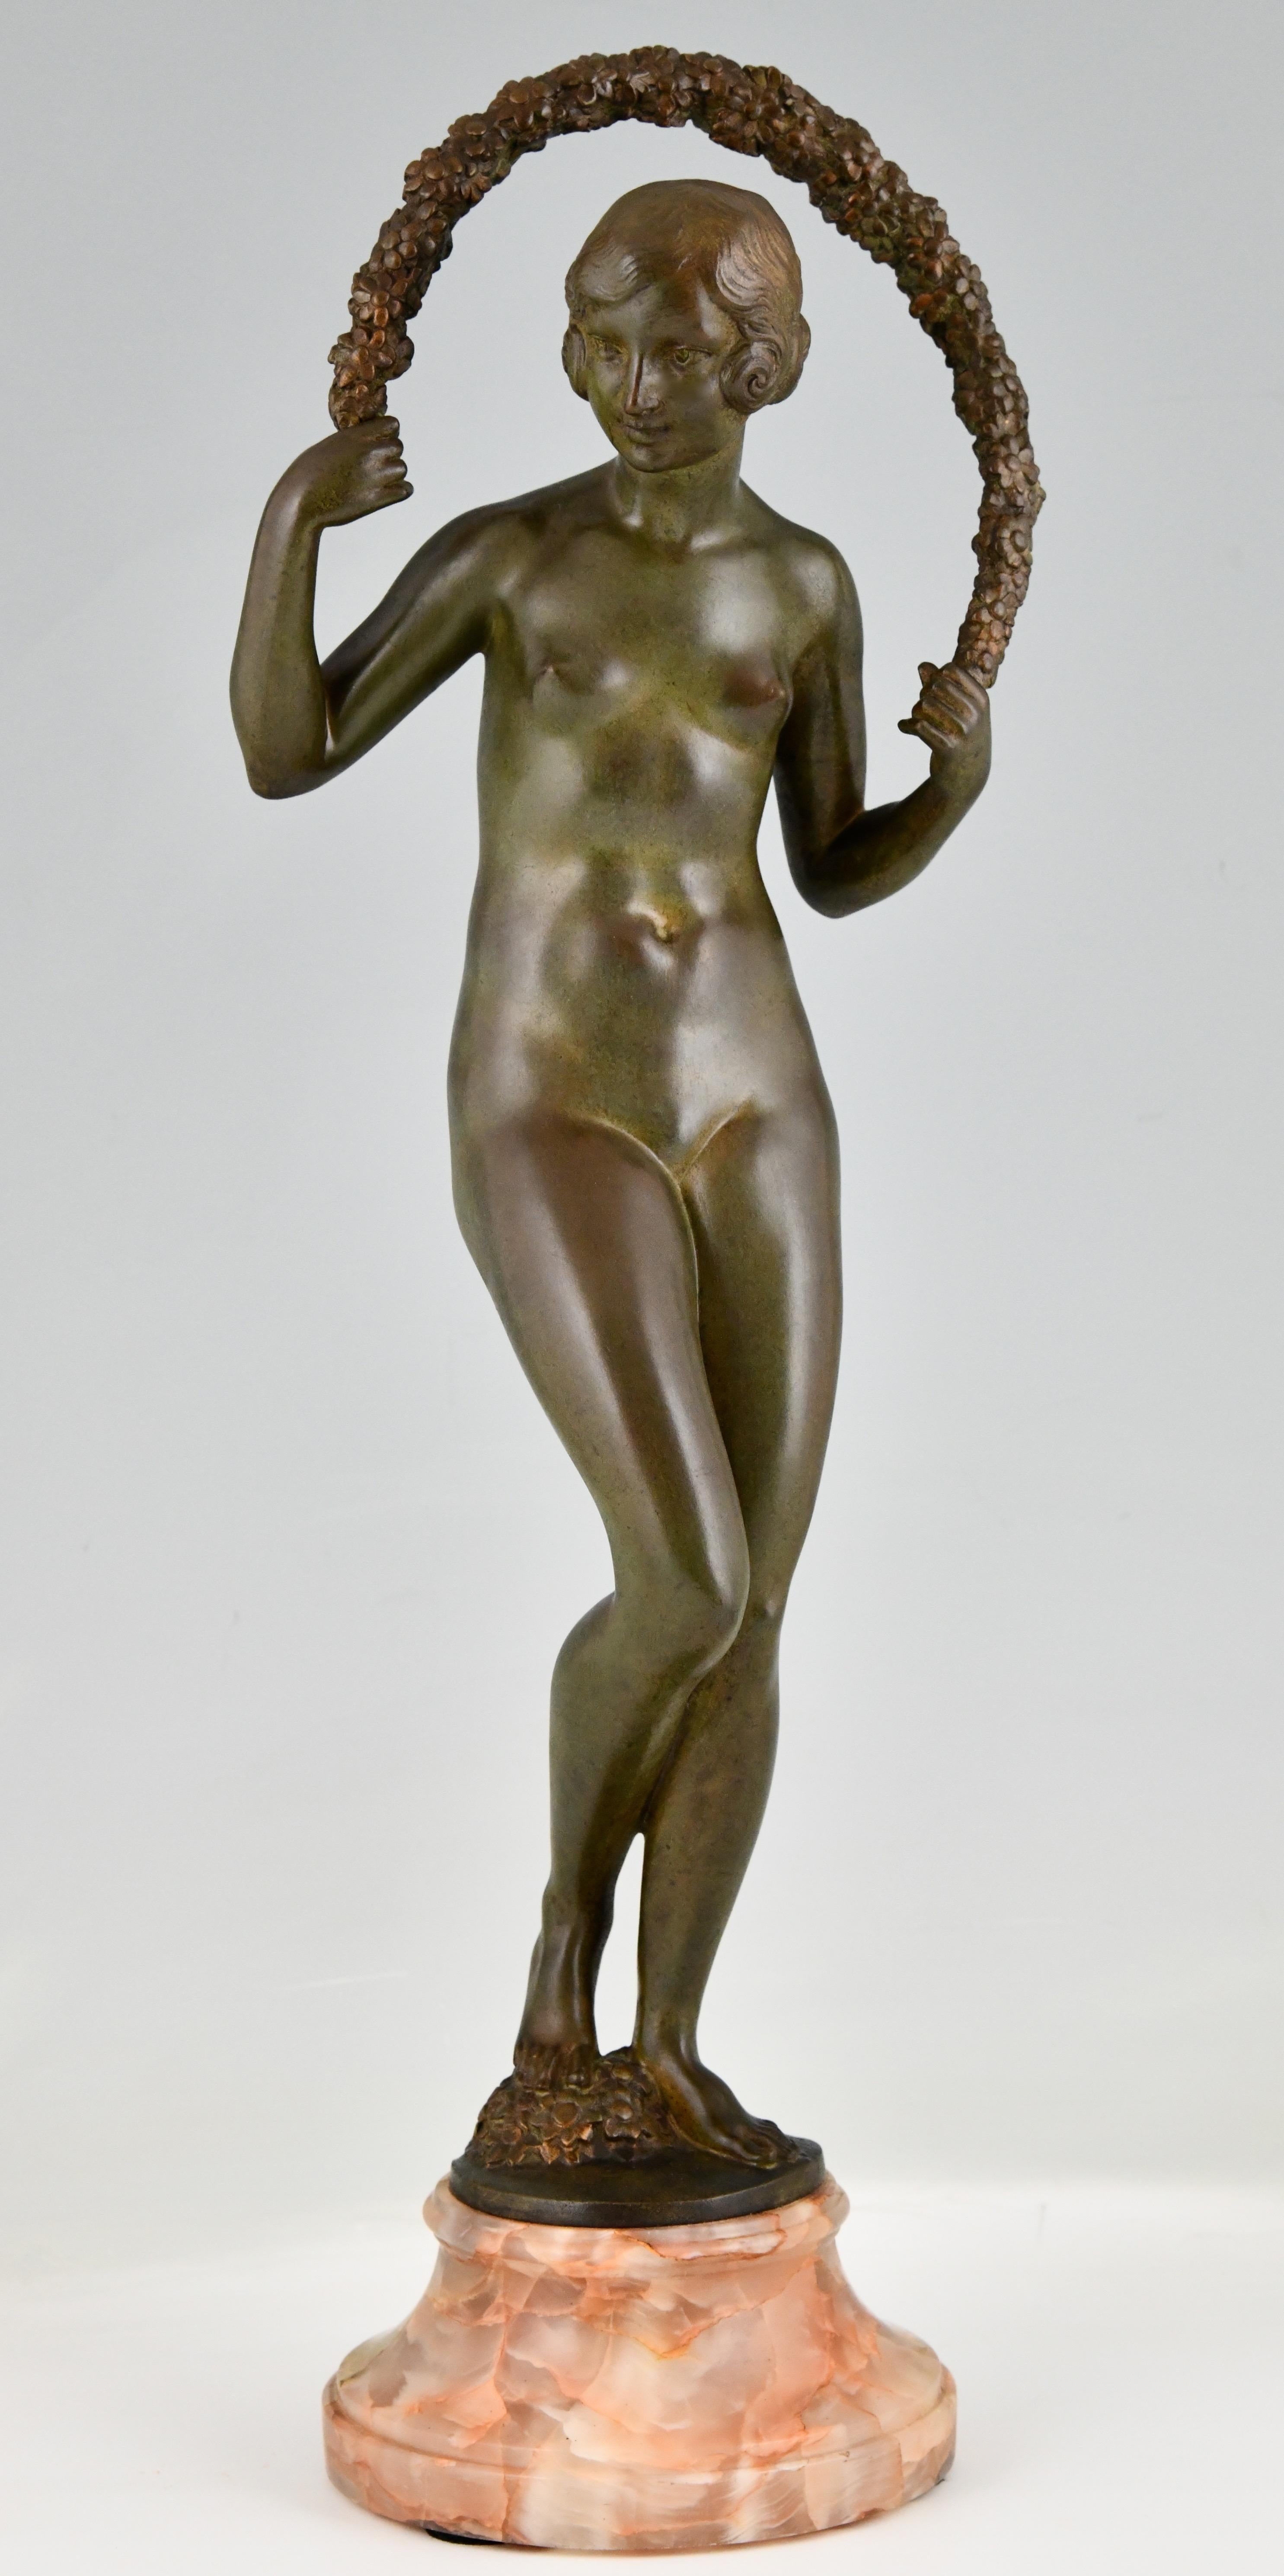 Art Deco bronze sculpture nude with garland by Joe Descomps Cormier.
Patinated bronze on marble base. France 1925. 
This bronze is illustrated in 
Art Deco and other figures, Brian Catley, Antique collectors club, 
Statuettes of the Art Deco